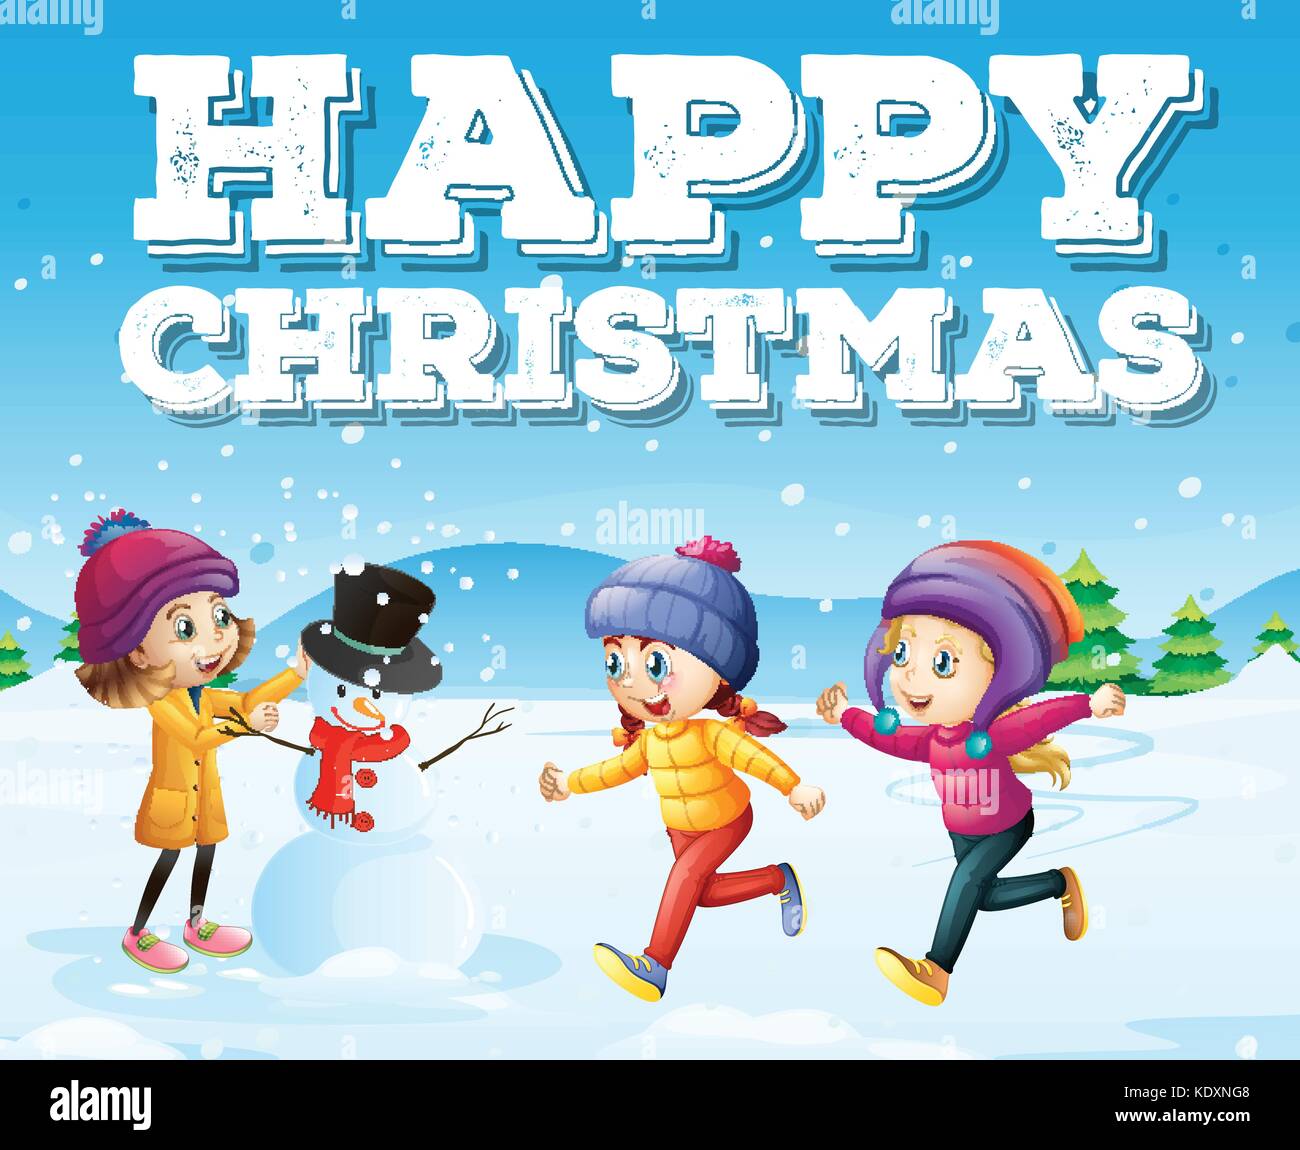 Happy christmas with kids in snowfield illustration Stock Vector